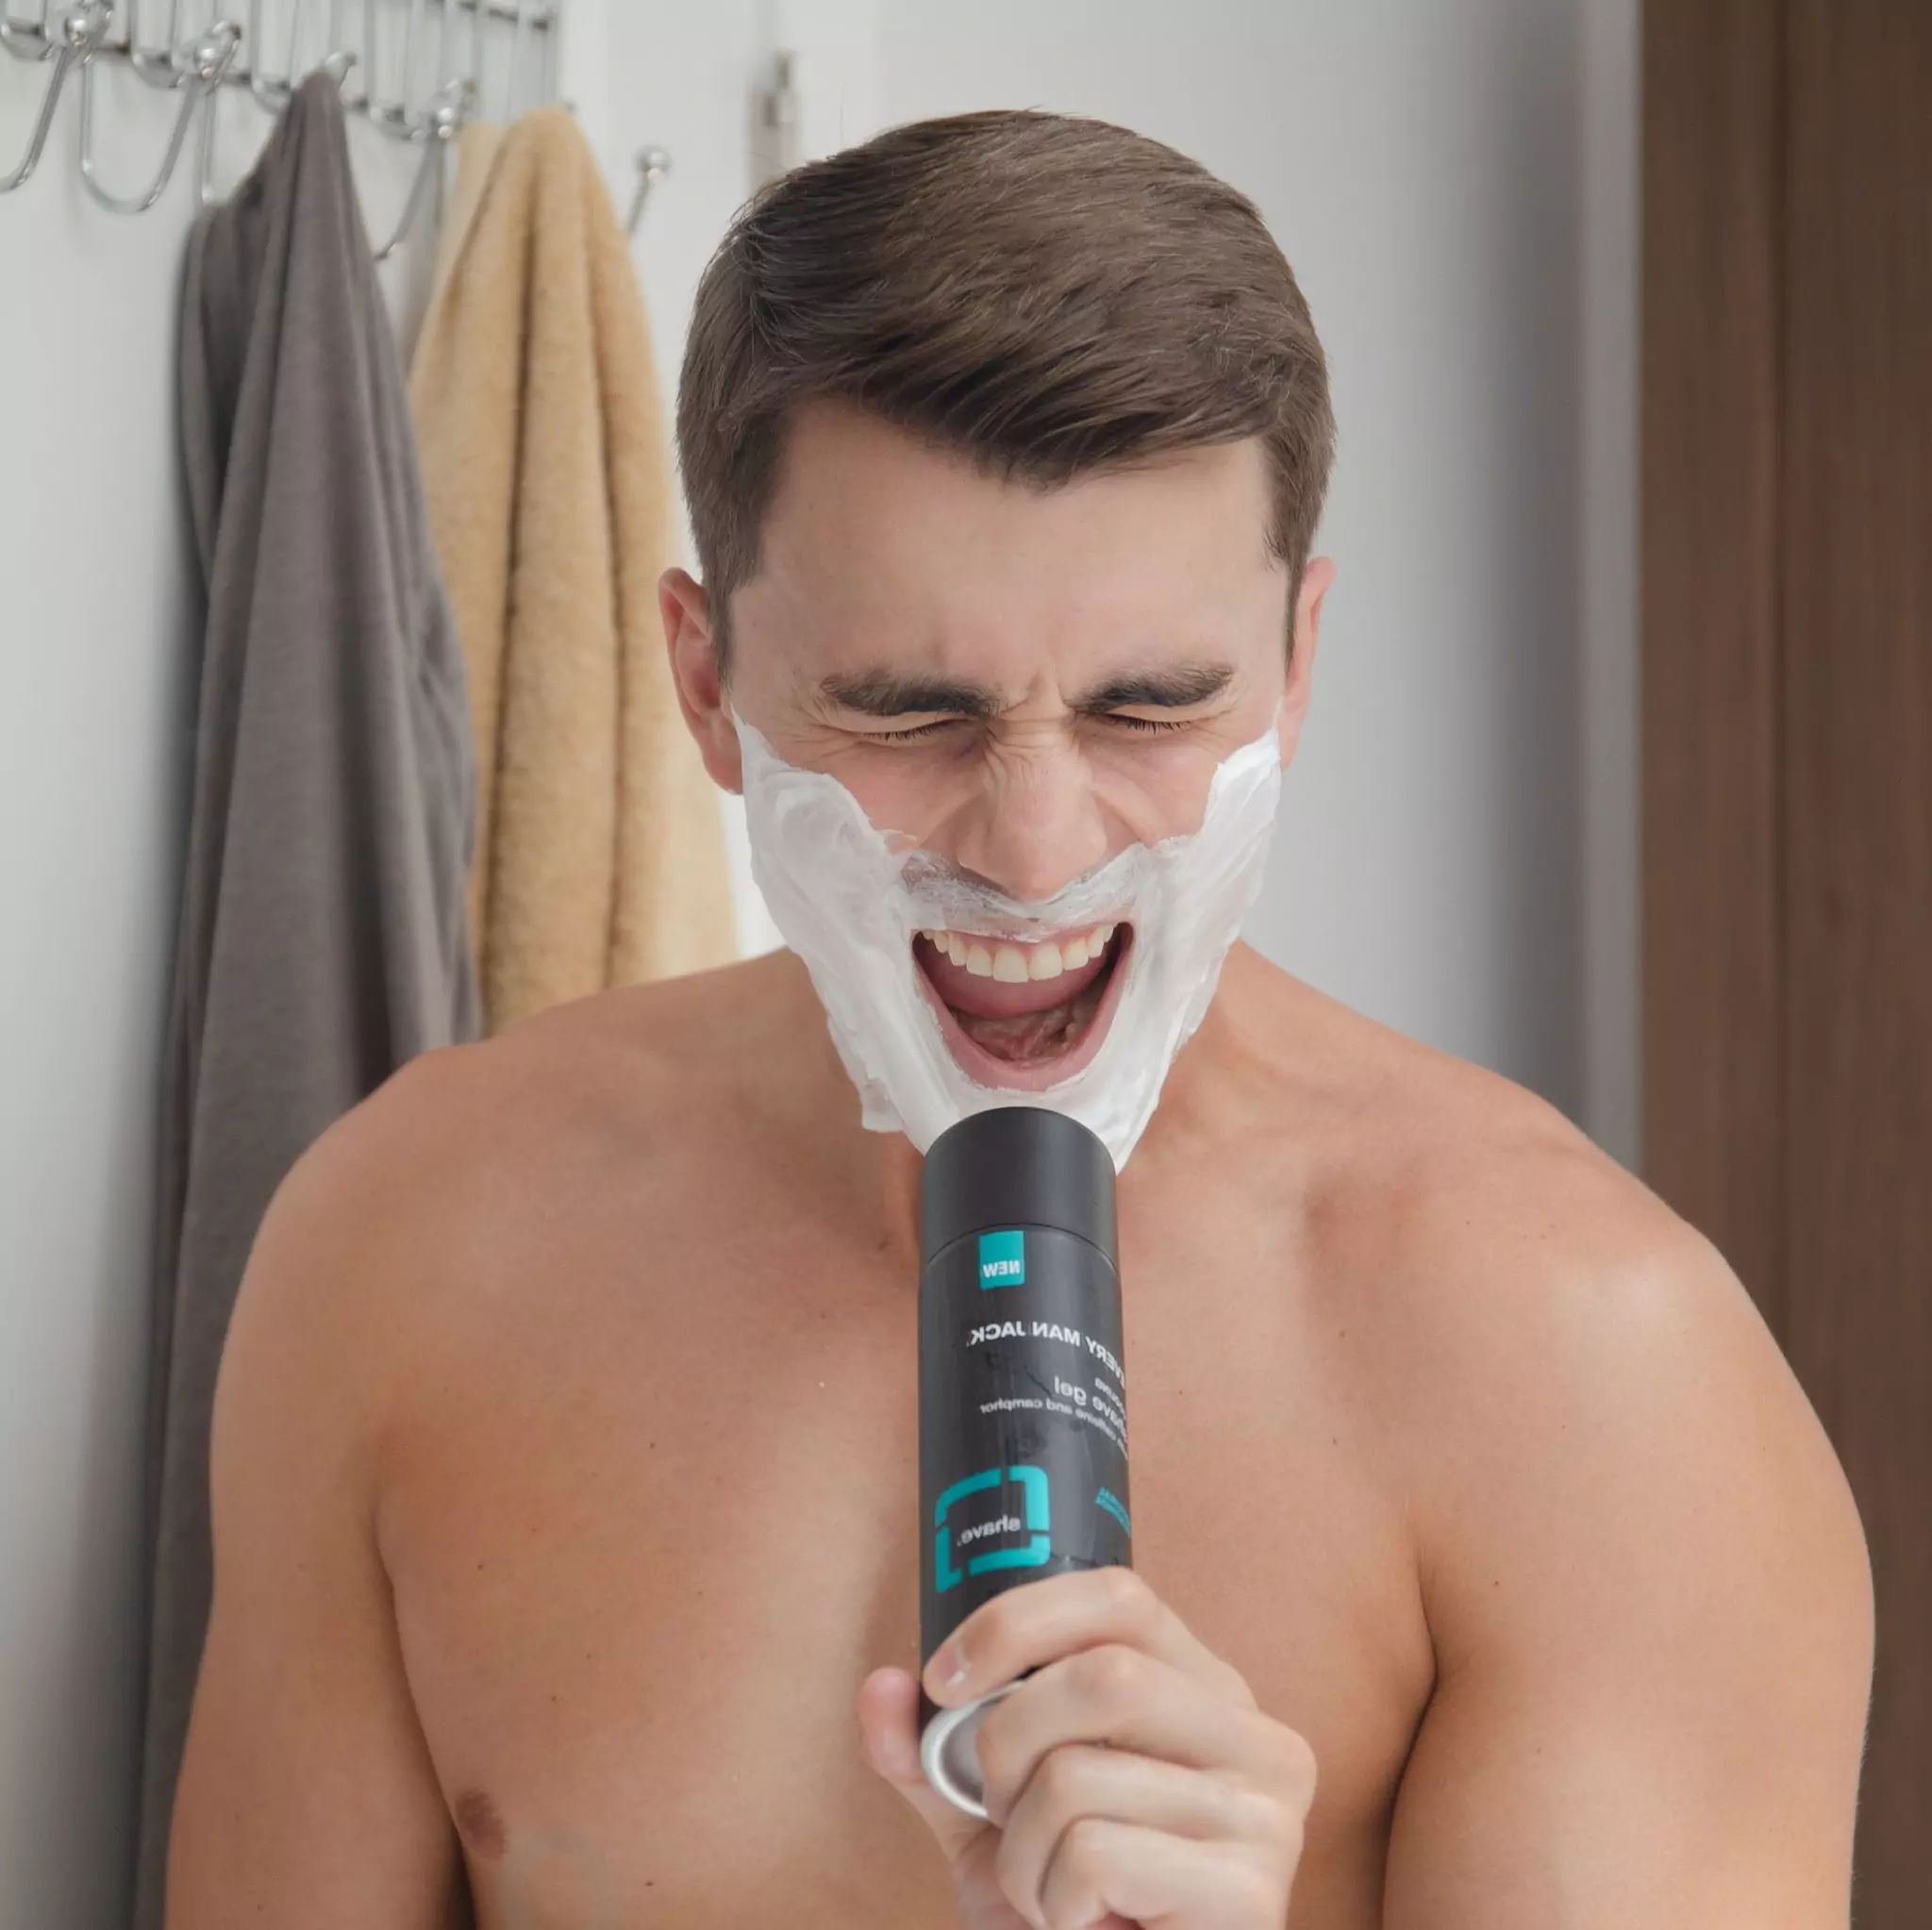 Man singing in the shower with a bottle of Every Man Jack, a men's skincare brand